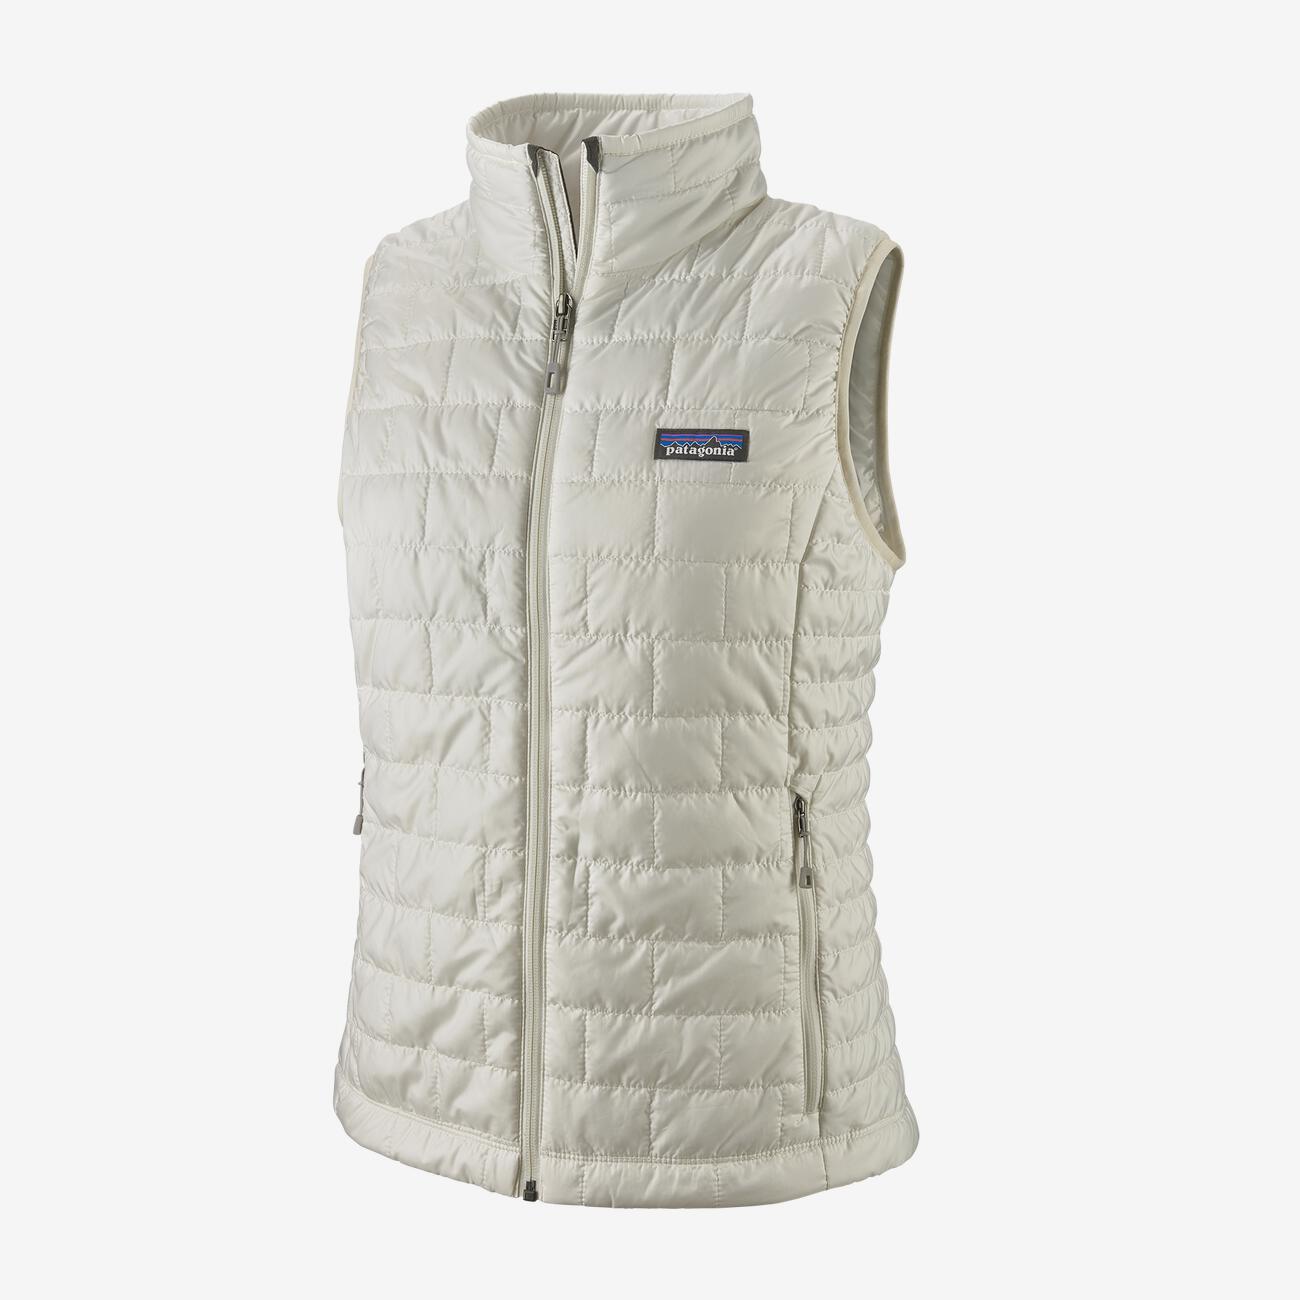 Patagonia Women's Nano Puff Vest-WOMENS CLOTHING-BIRCH WHITE-S-Kevin's Fine Outdoor Gear & Apparel